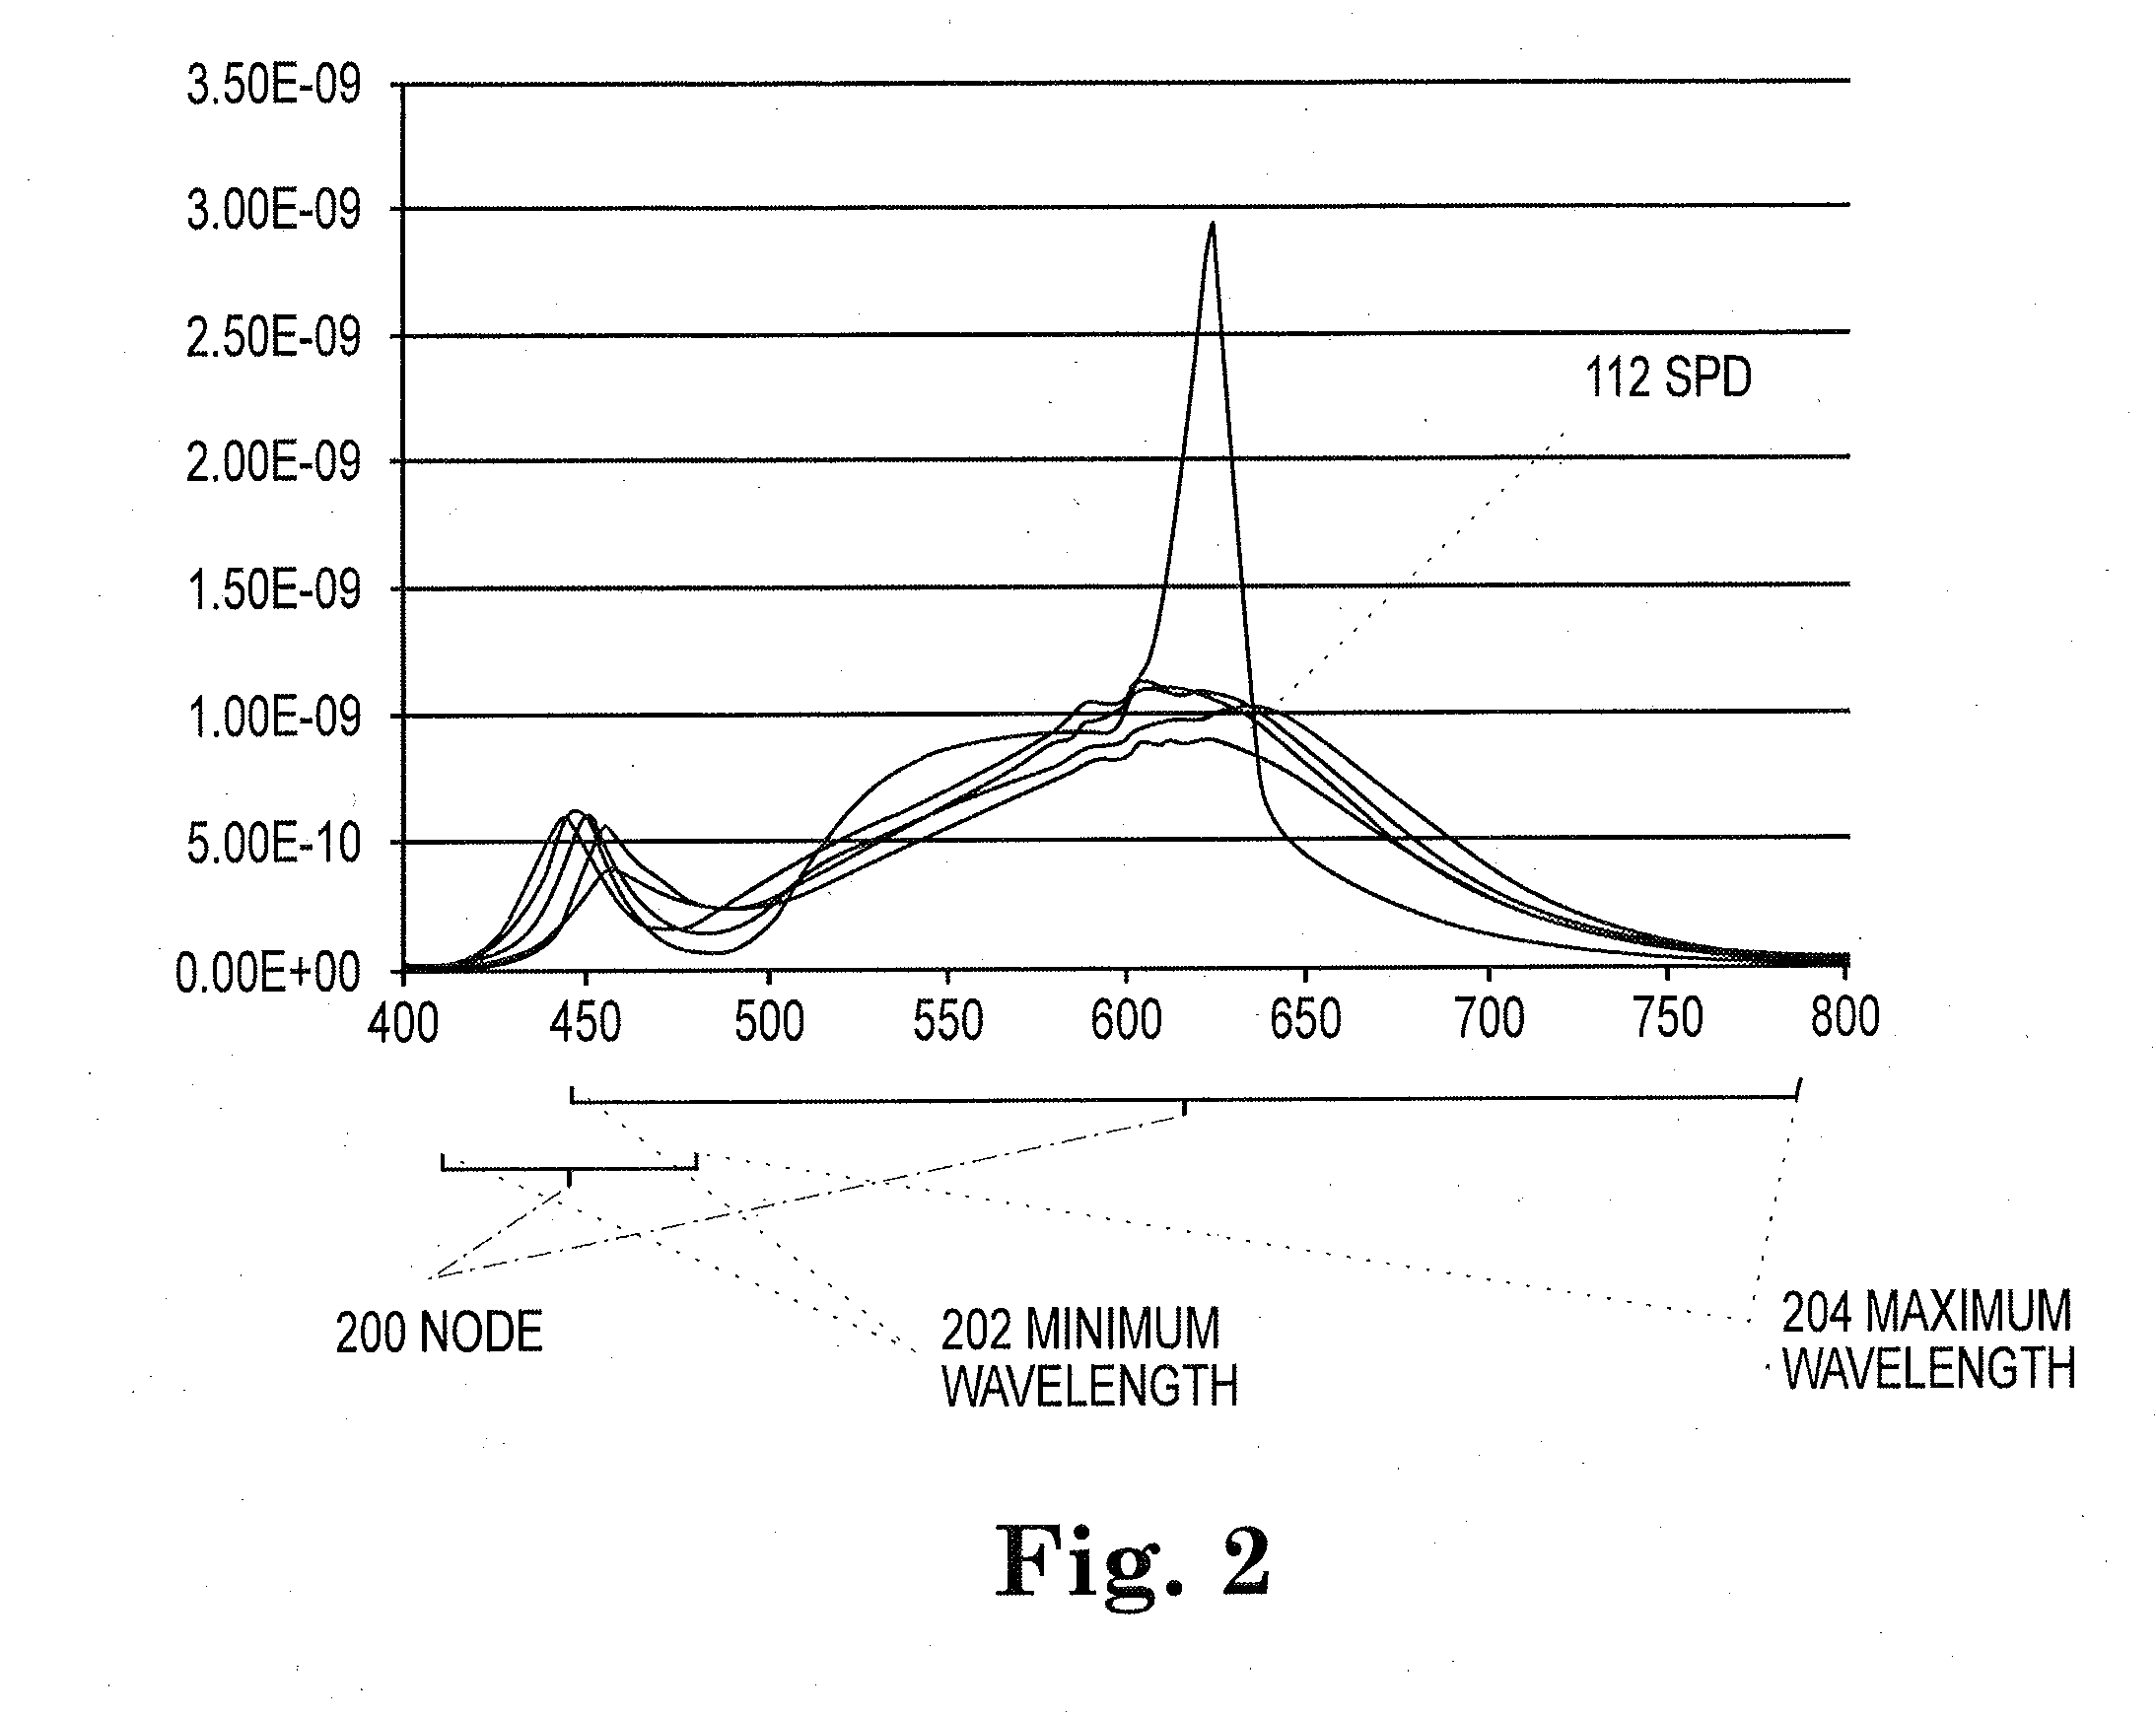 System and Method of Quantifying Color and Intensity of Light Sources